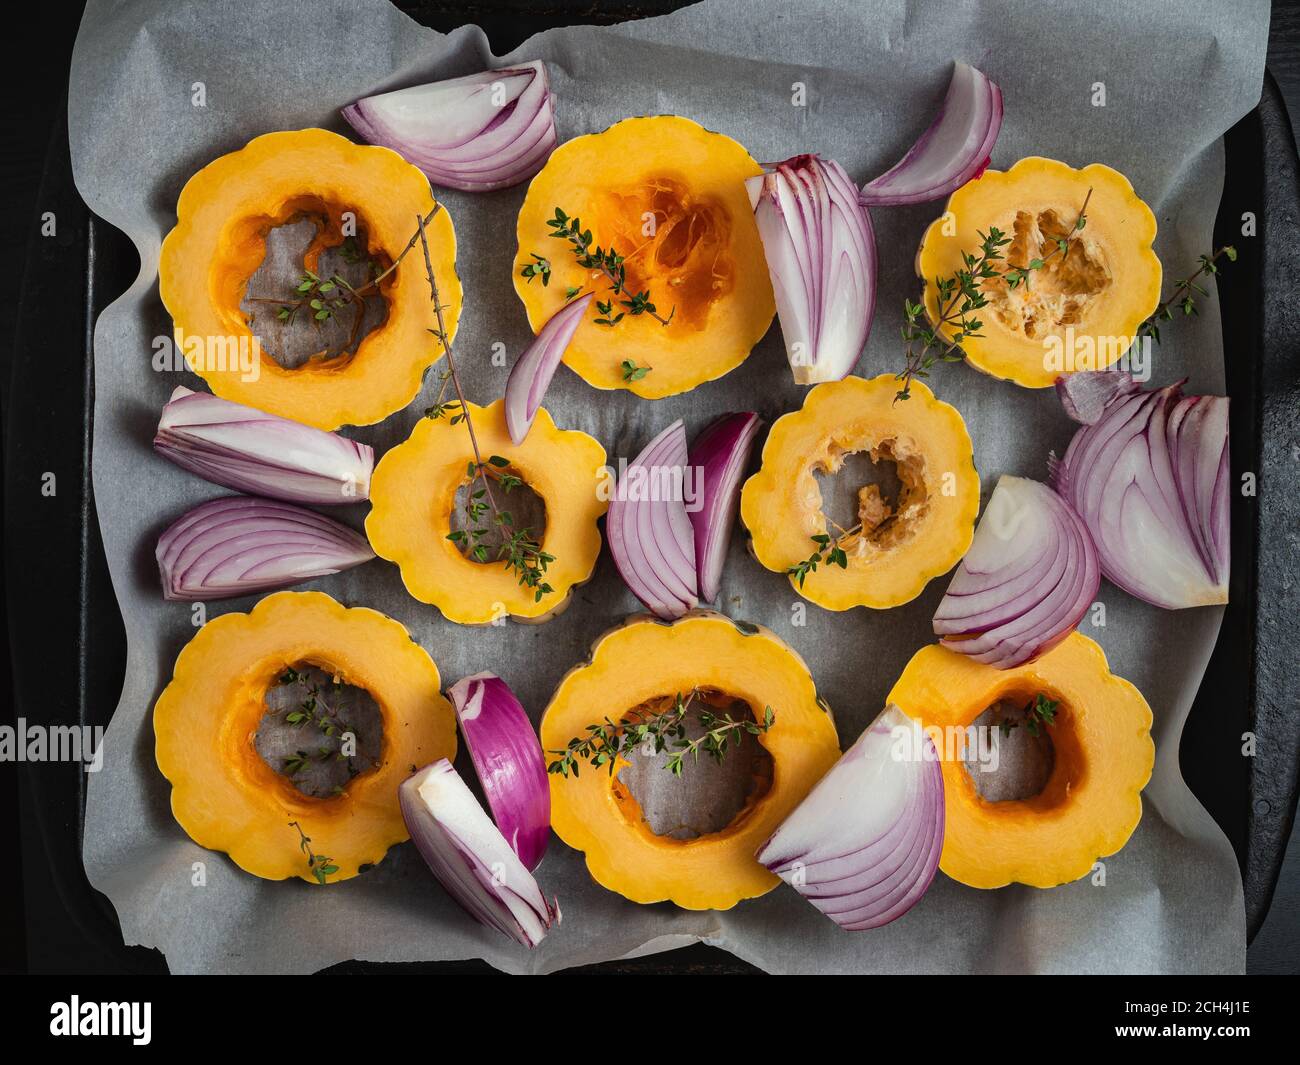 Slices of delicata squash and red onions on a baking sheet. Stock Photo